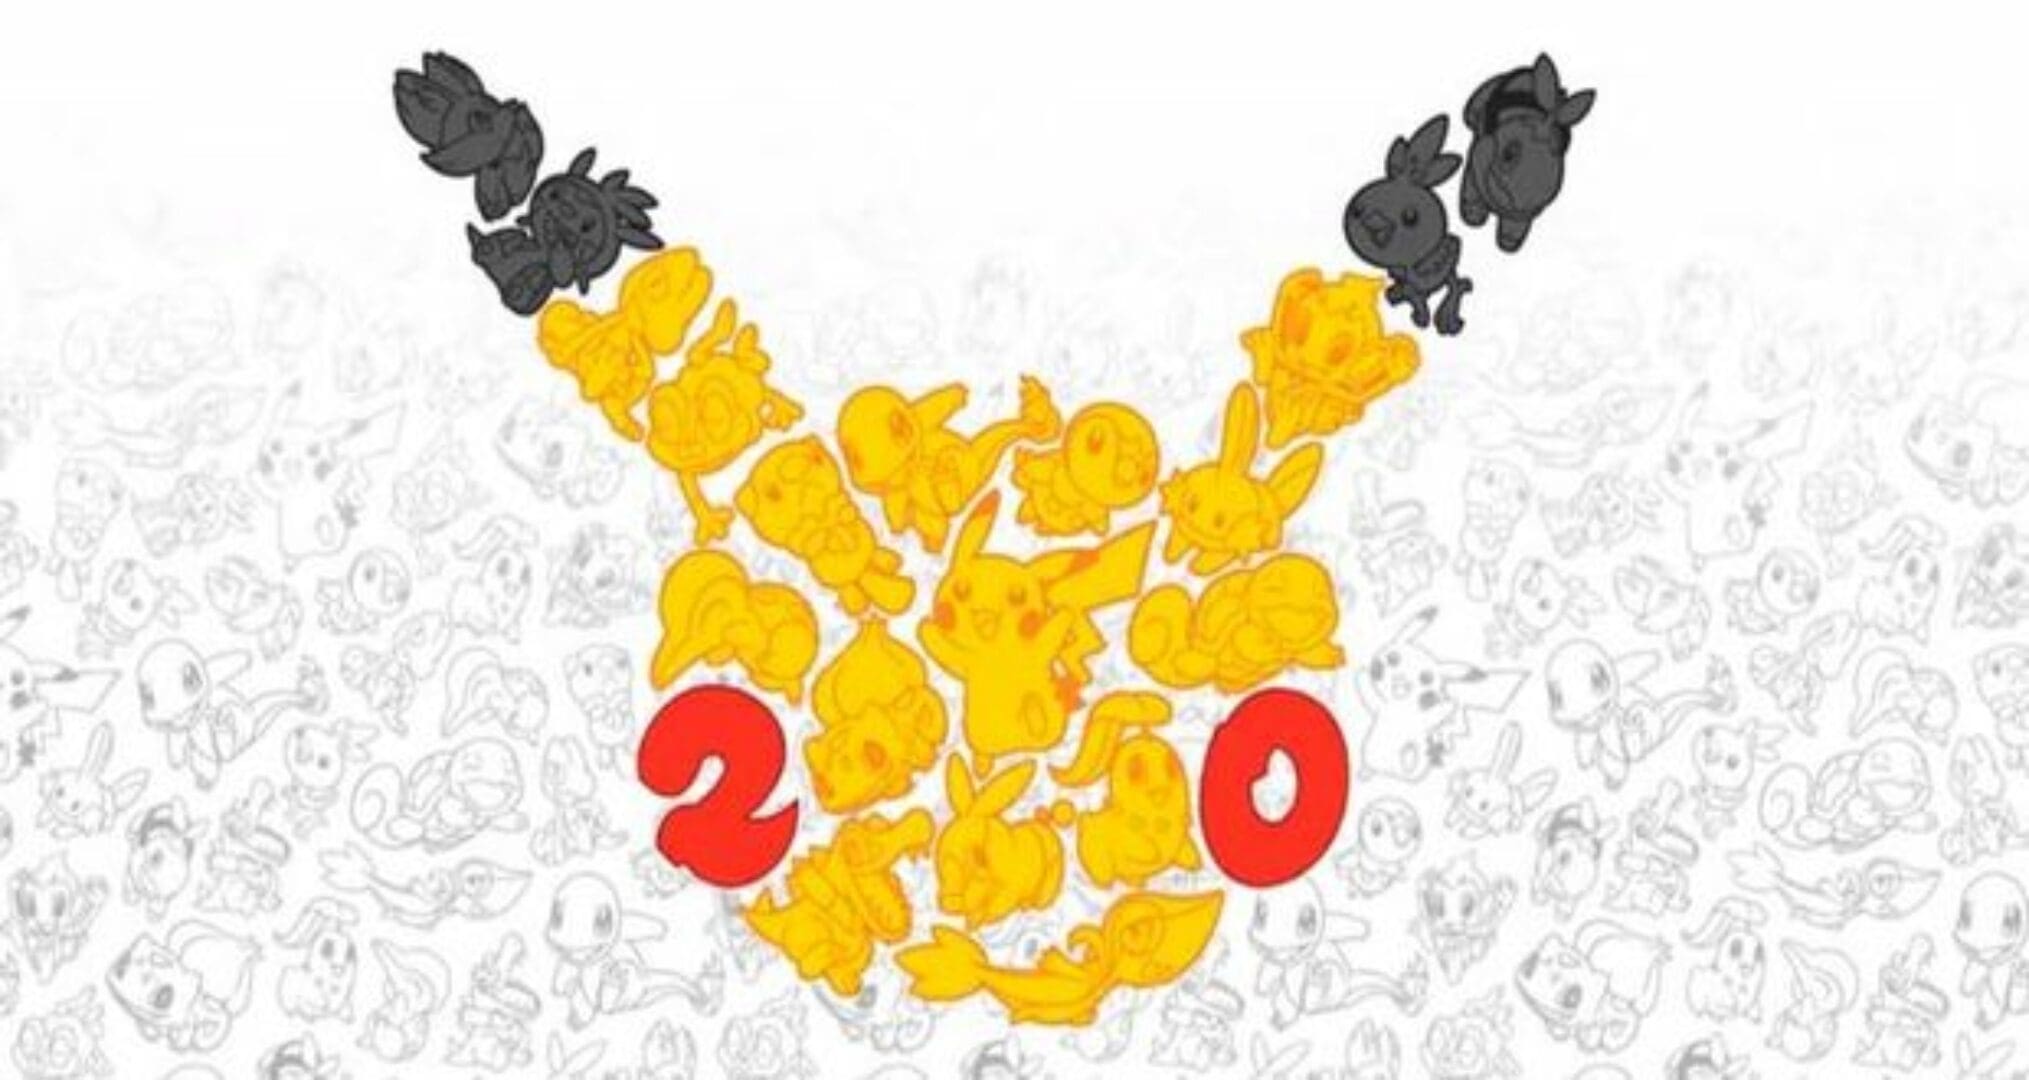 Pokémon Anniversary Continues With Another Mythical Release!